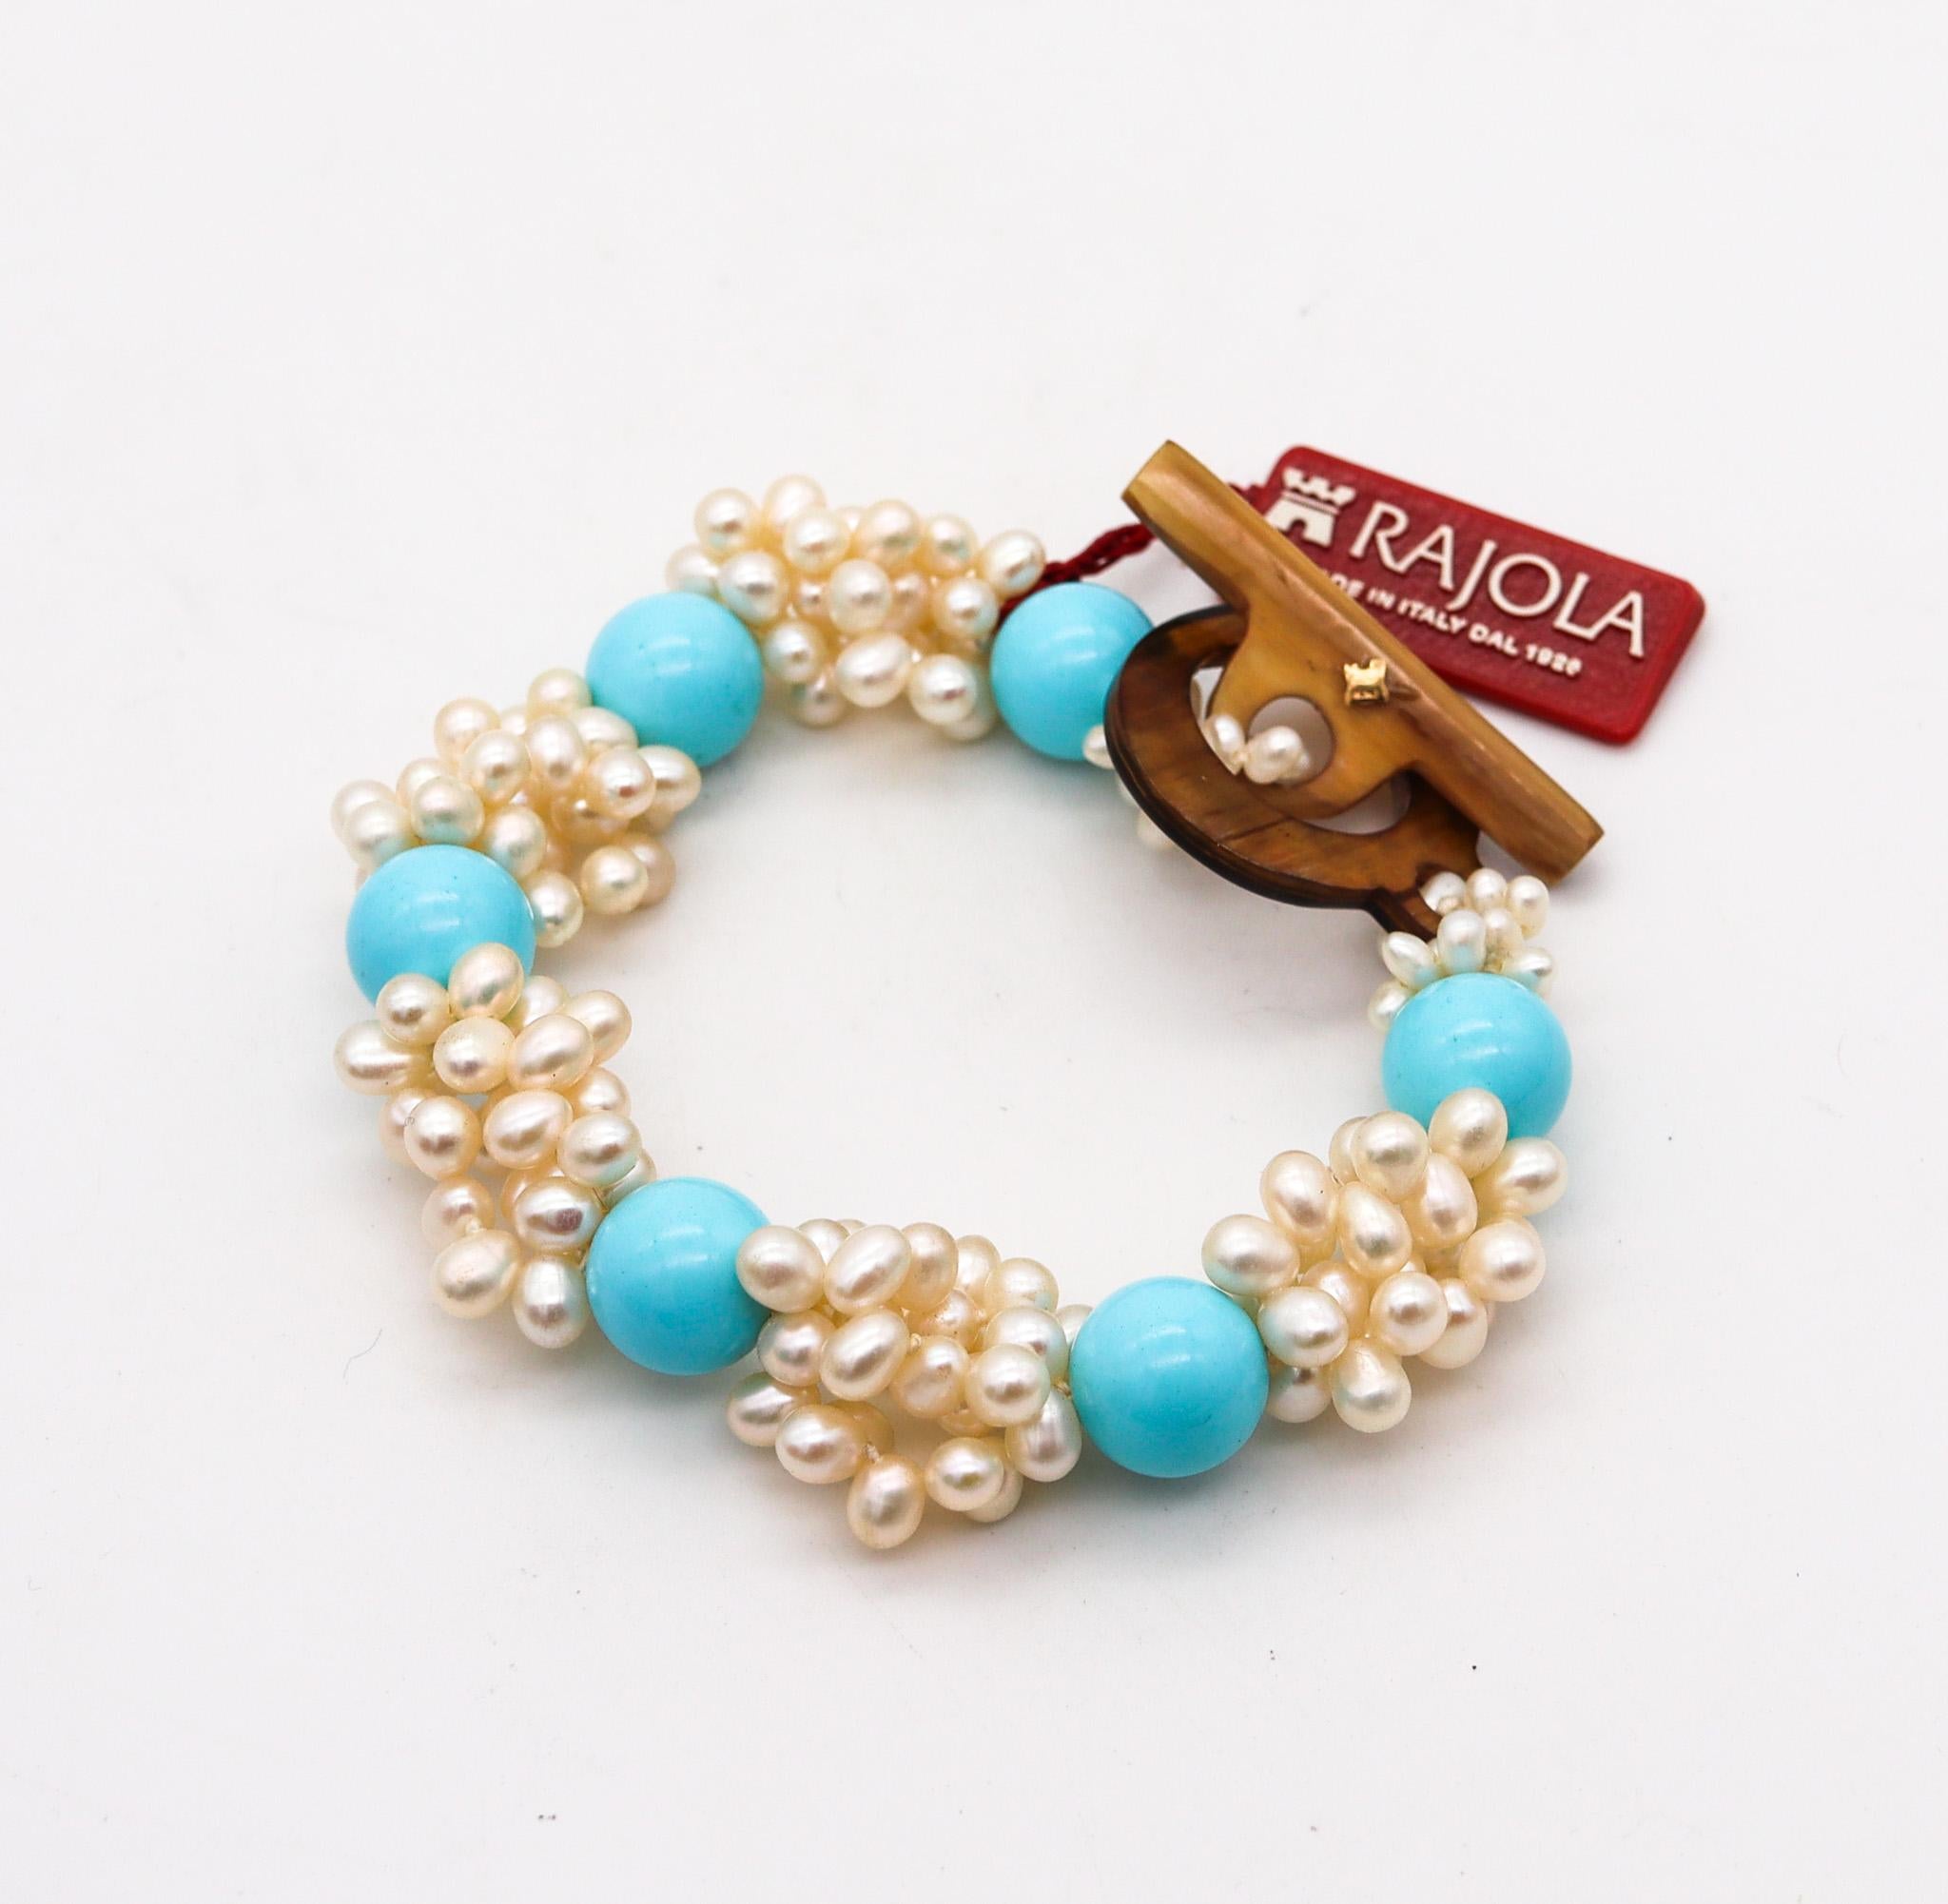 A bracelet designed by Rajola.

Beautiful contemporary bracelet, created in Italy at the atelier of Rajola. This piece is composed by multiples cultured pearls and six spheres carved from blue turquoises and is fitted with a toggle lock carved from